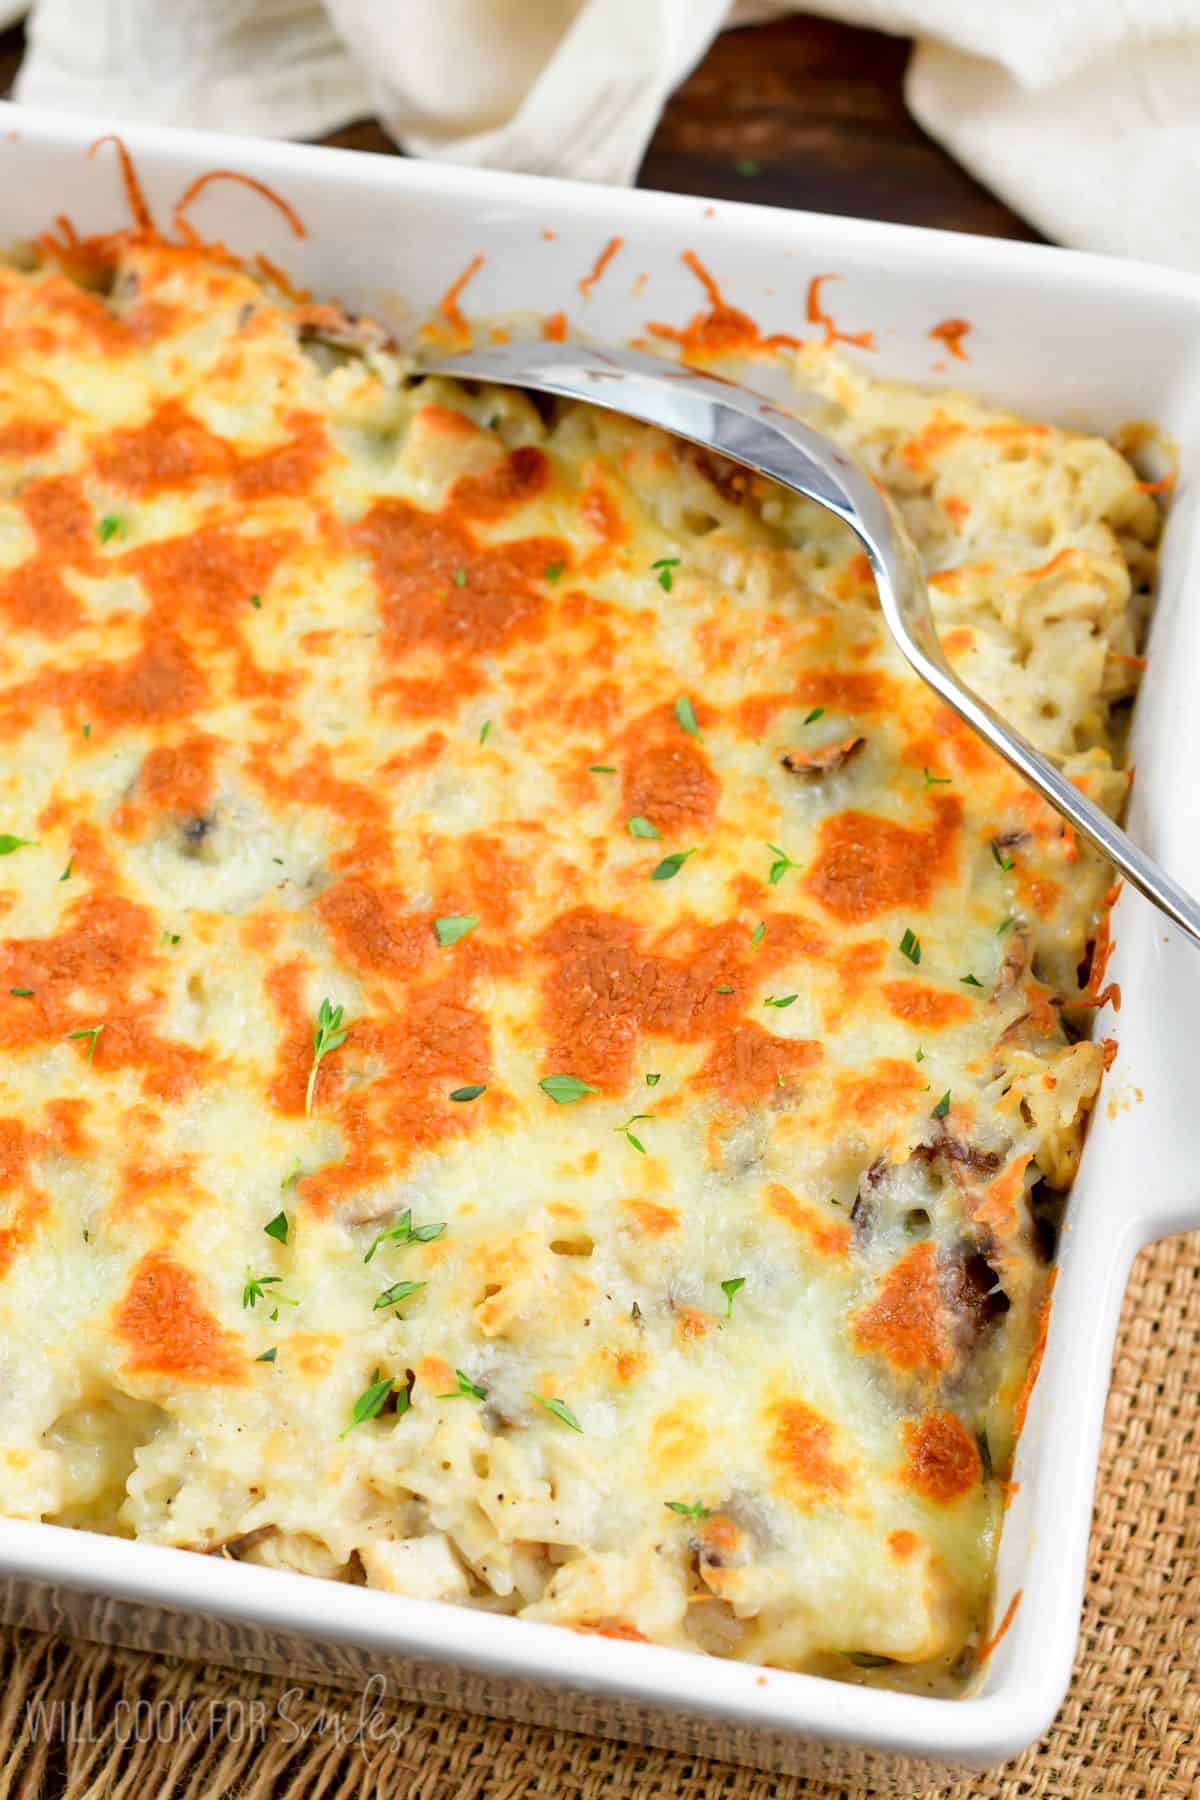 Creamy chicken rice casserole in a casserole dish with a big metal spoon.